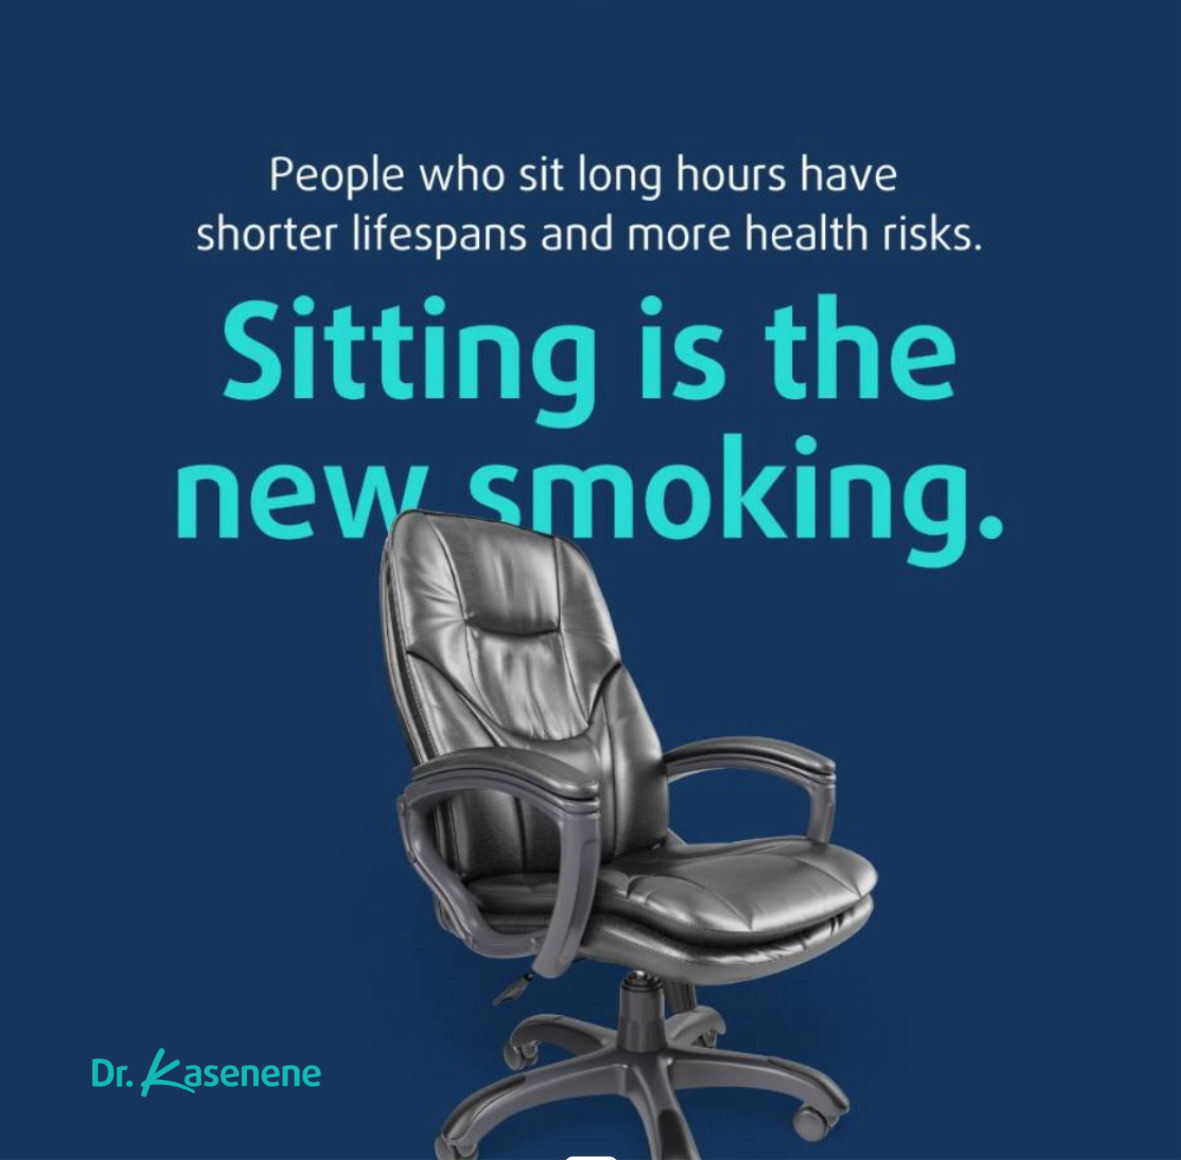 Sitting for more than an hour without moving is a bad habit we should all avoid. It promotes inflammation which drives most diseases. Sitting can therefore increase your risk for sickness and an earlier death. Walking does the opposite. Please keep this in mind always!